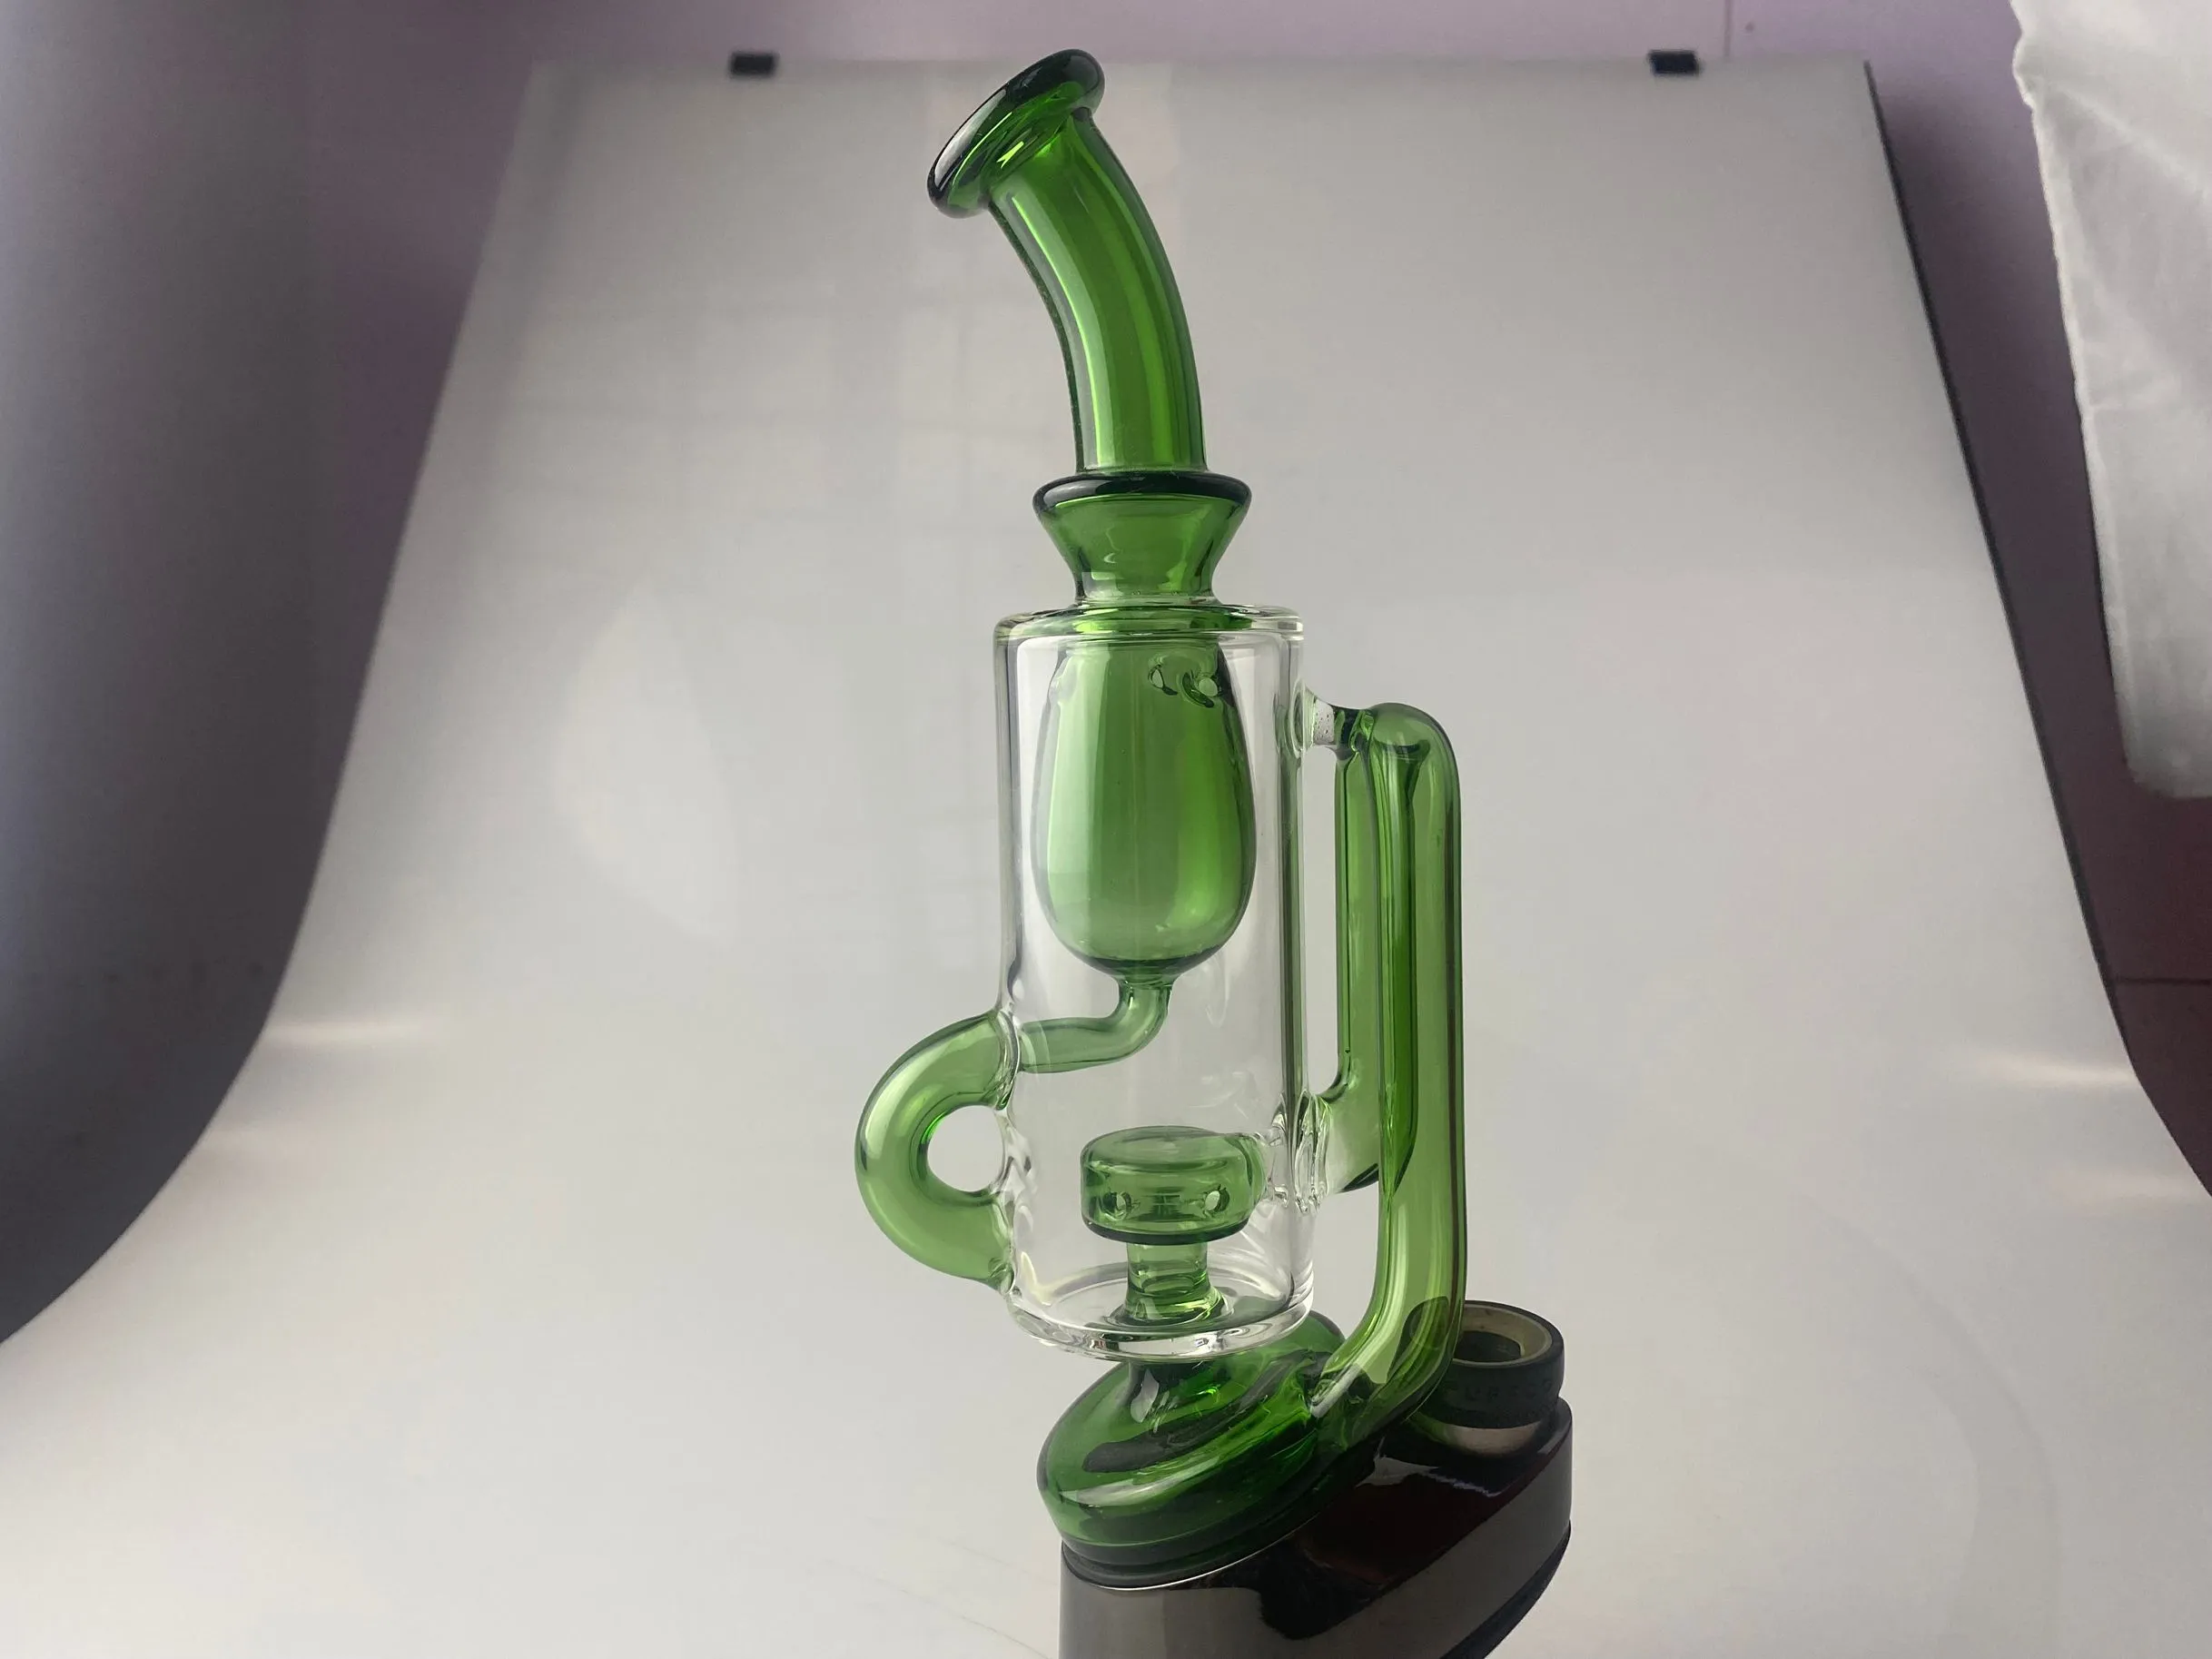 Exclusivo Biao Glass Bongs Copo Estilo Golhehs Hookahs Water Pipes Green Color To Pick